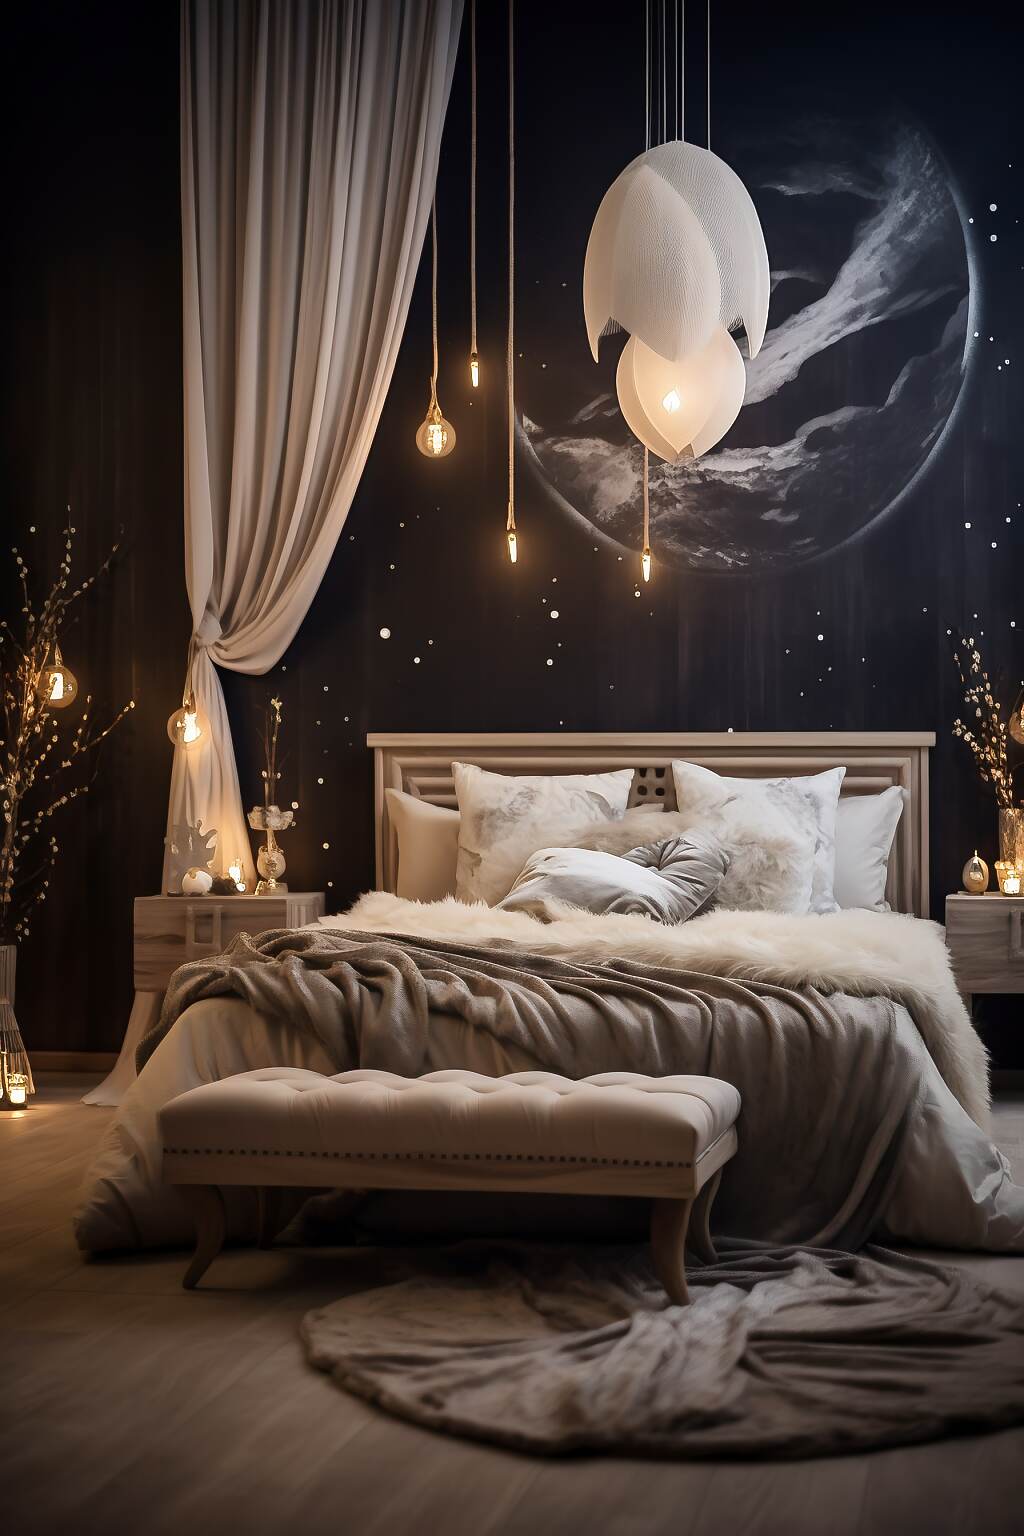 Spacious Dark Boho Bedroom With A Silver &Amp; White Color Scheme, Featuring Moon Artwork, Silk Textiles, And Crystal Chandelier, Creating A Graceful And Sophisticated Atmosphere.